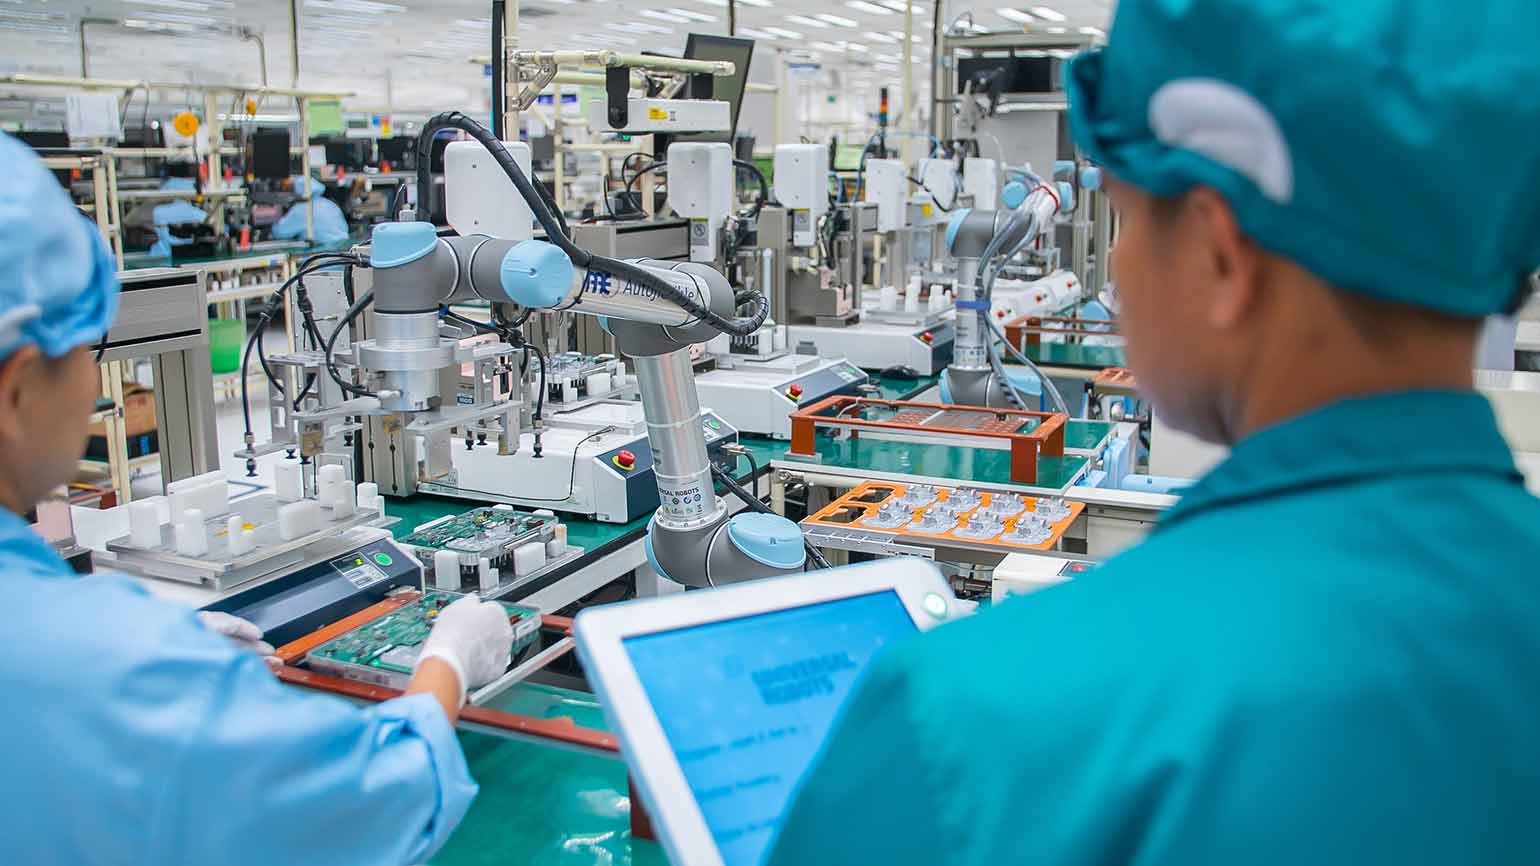 HOW TO SUCCEED WHEN THE PACE OF ELECTRONICS MANUFACTURING